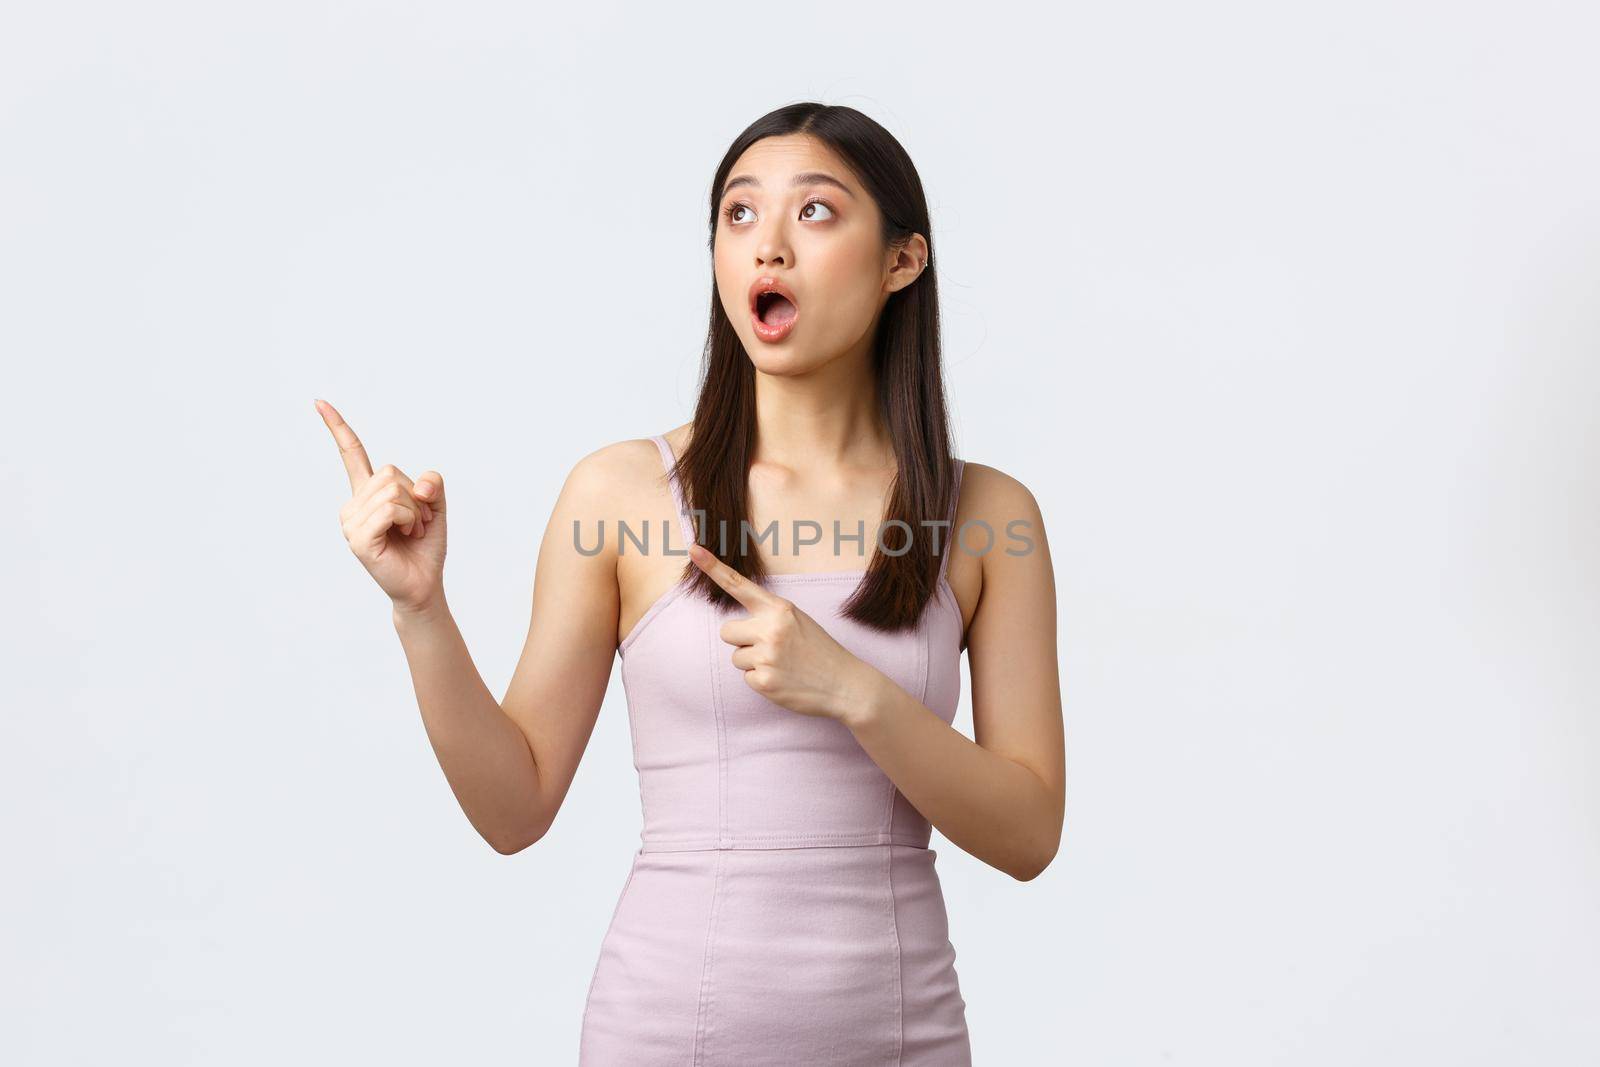 Luxury women, party and holidays concept. Impressed and shocked beautiful asian woman in evening dress, drop jaw and pointing upper left corner with astonished expression, white background.